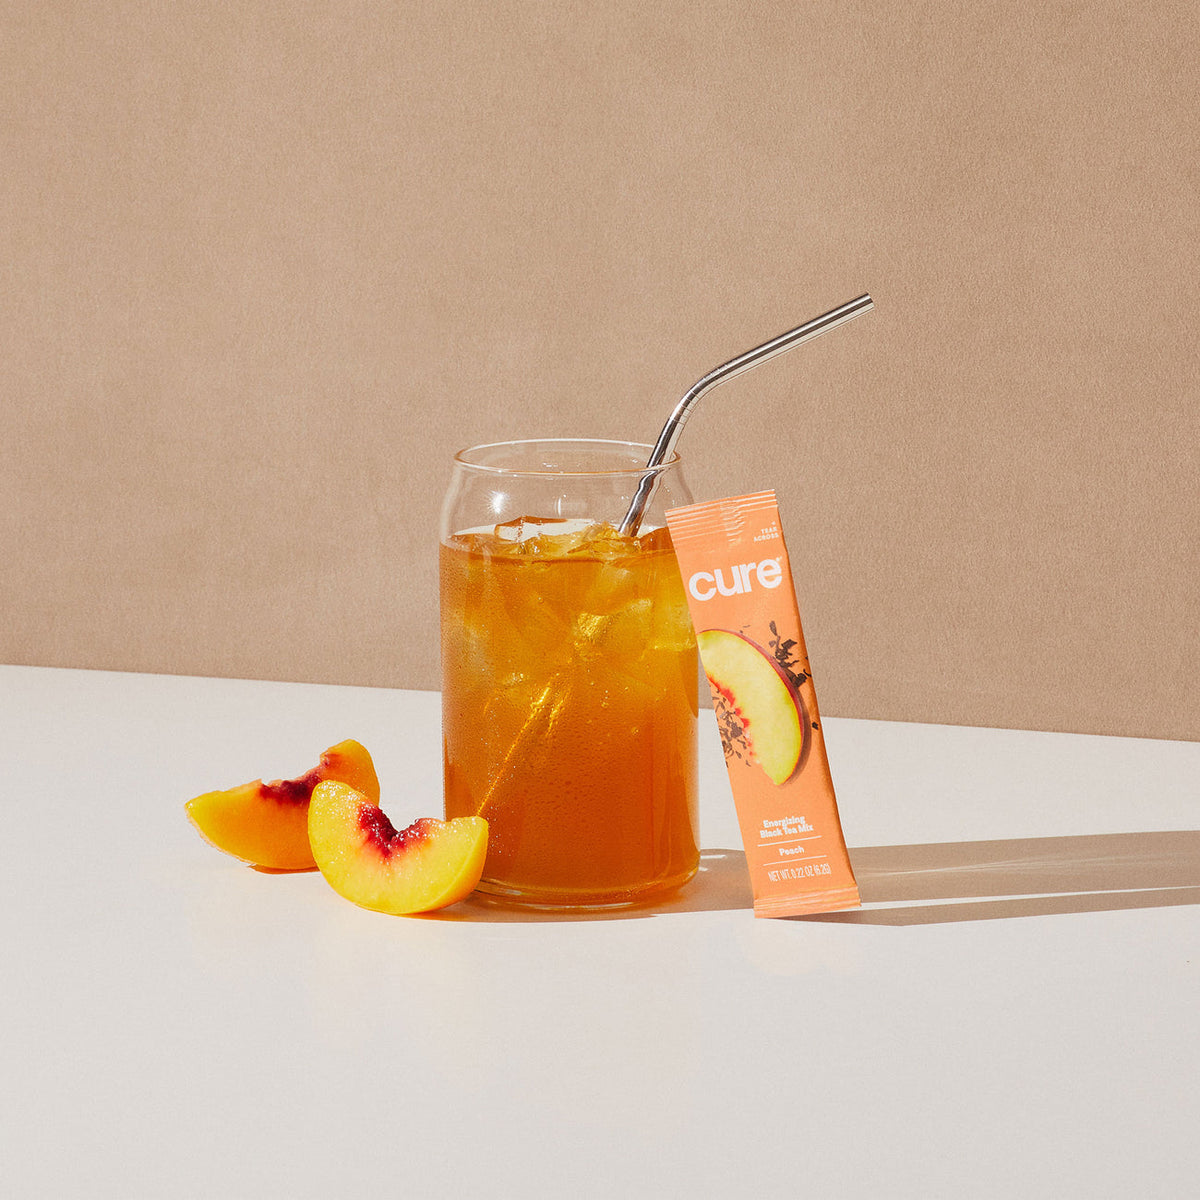 Peach black tea drink with mix packet and peach slices.